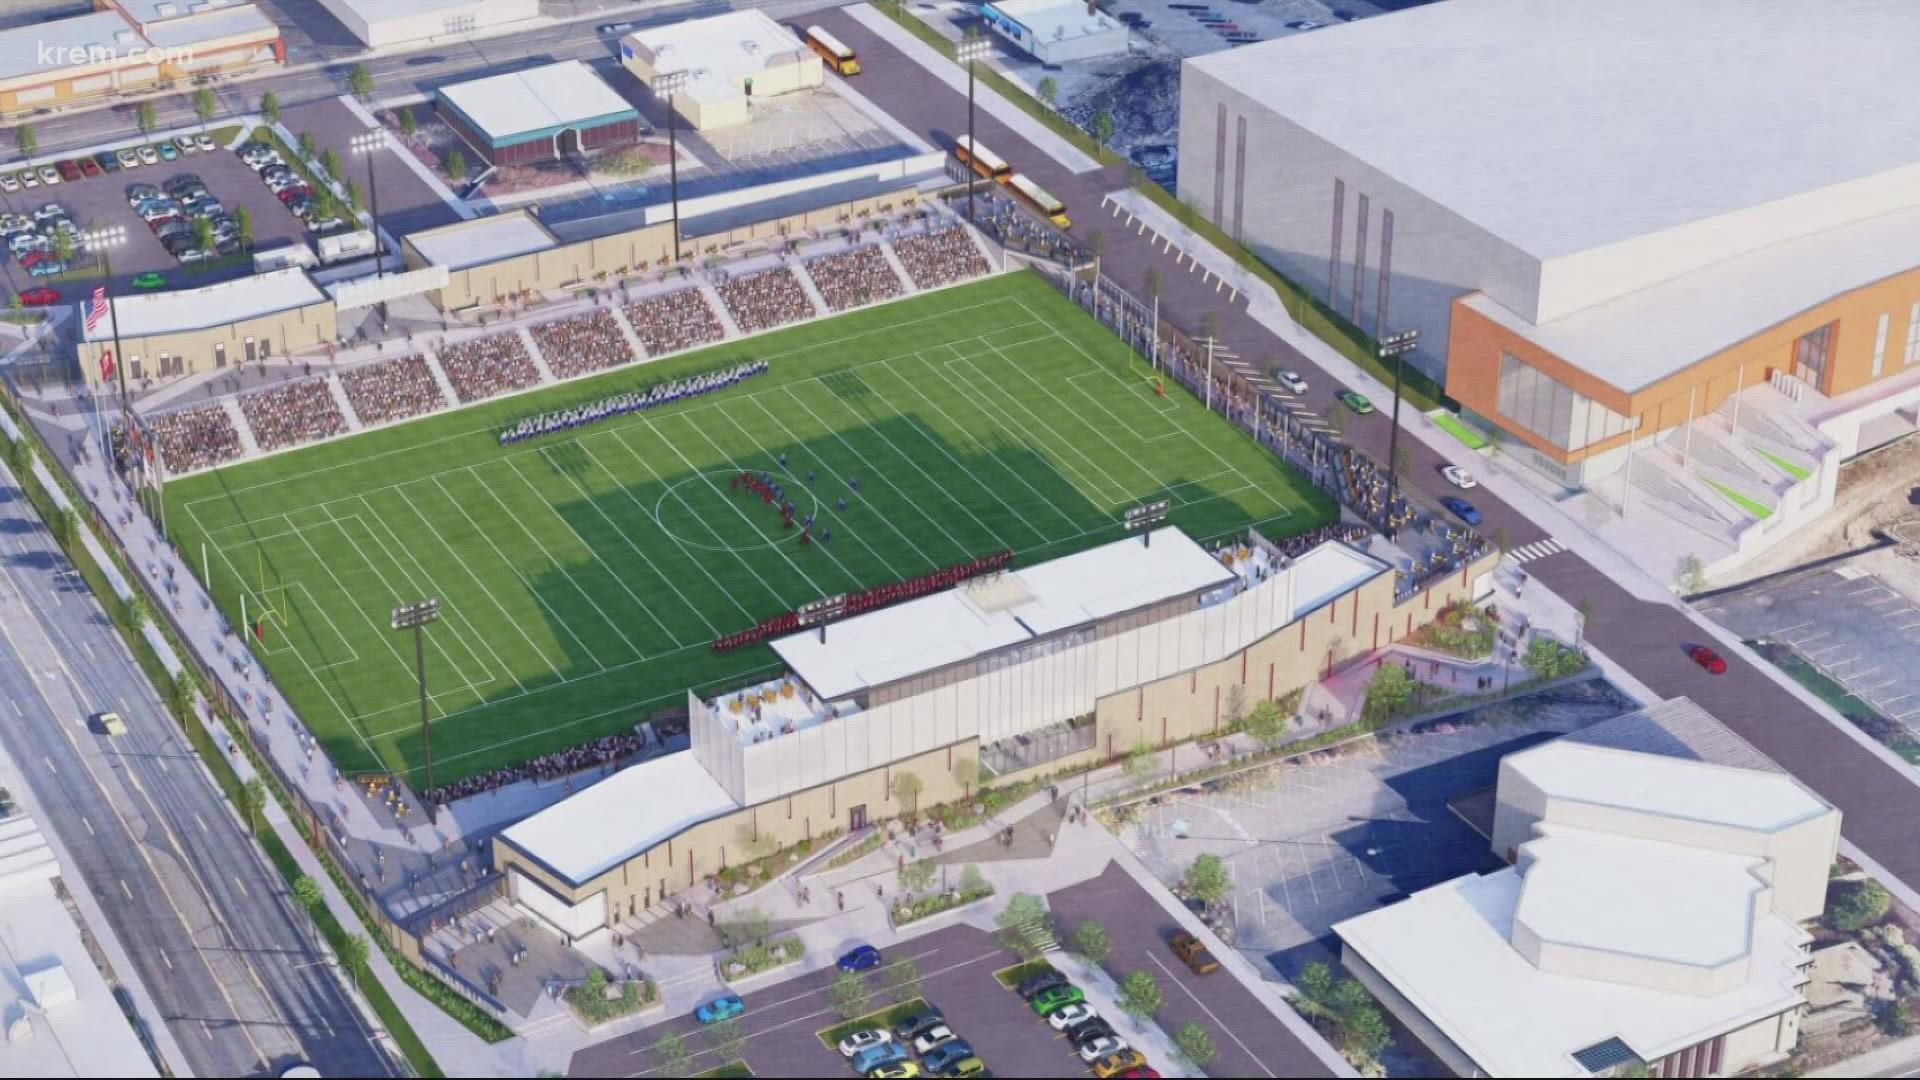 Fans who put down a $20 deposit have the opportunity to purchase season tickets for the men’s and women’s soccer teams to play in 2023 or 2024.